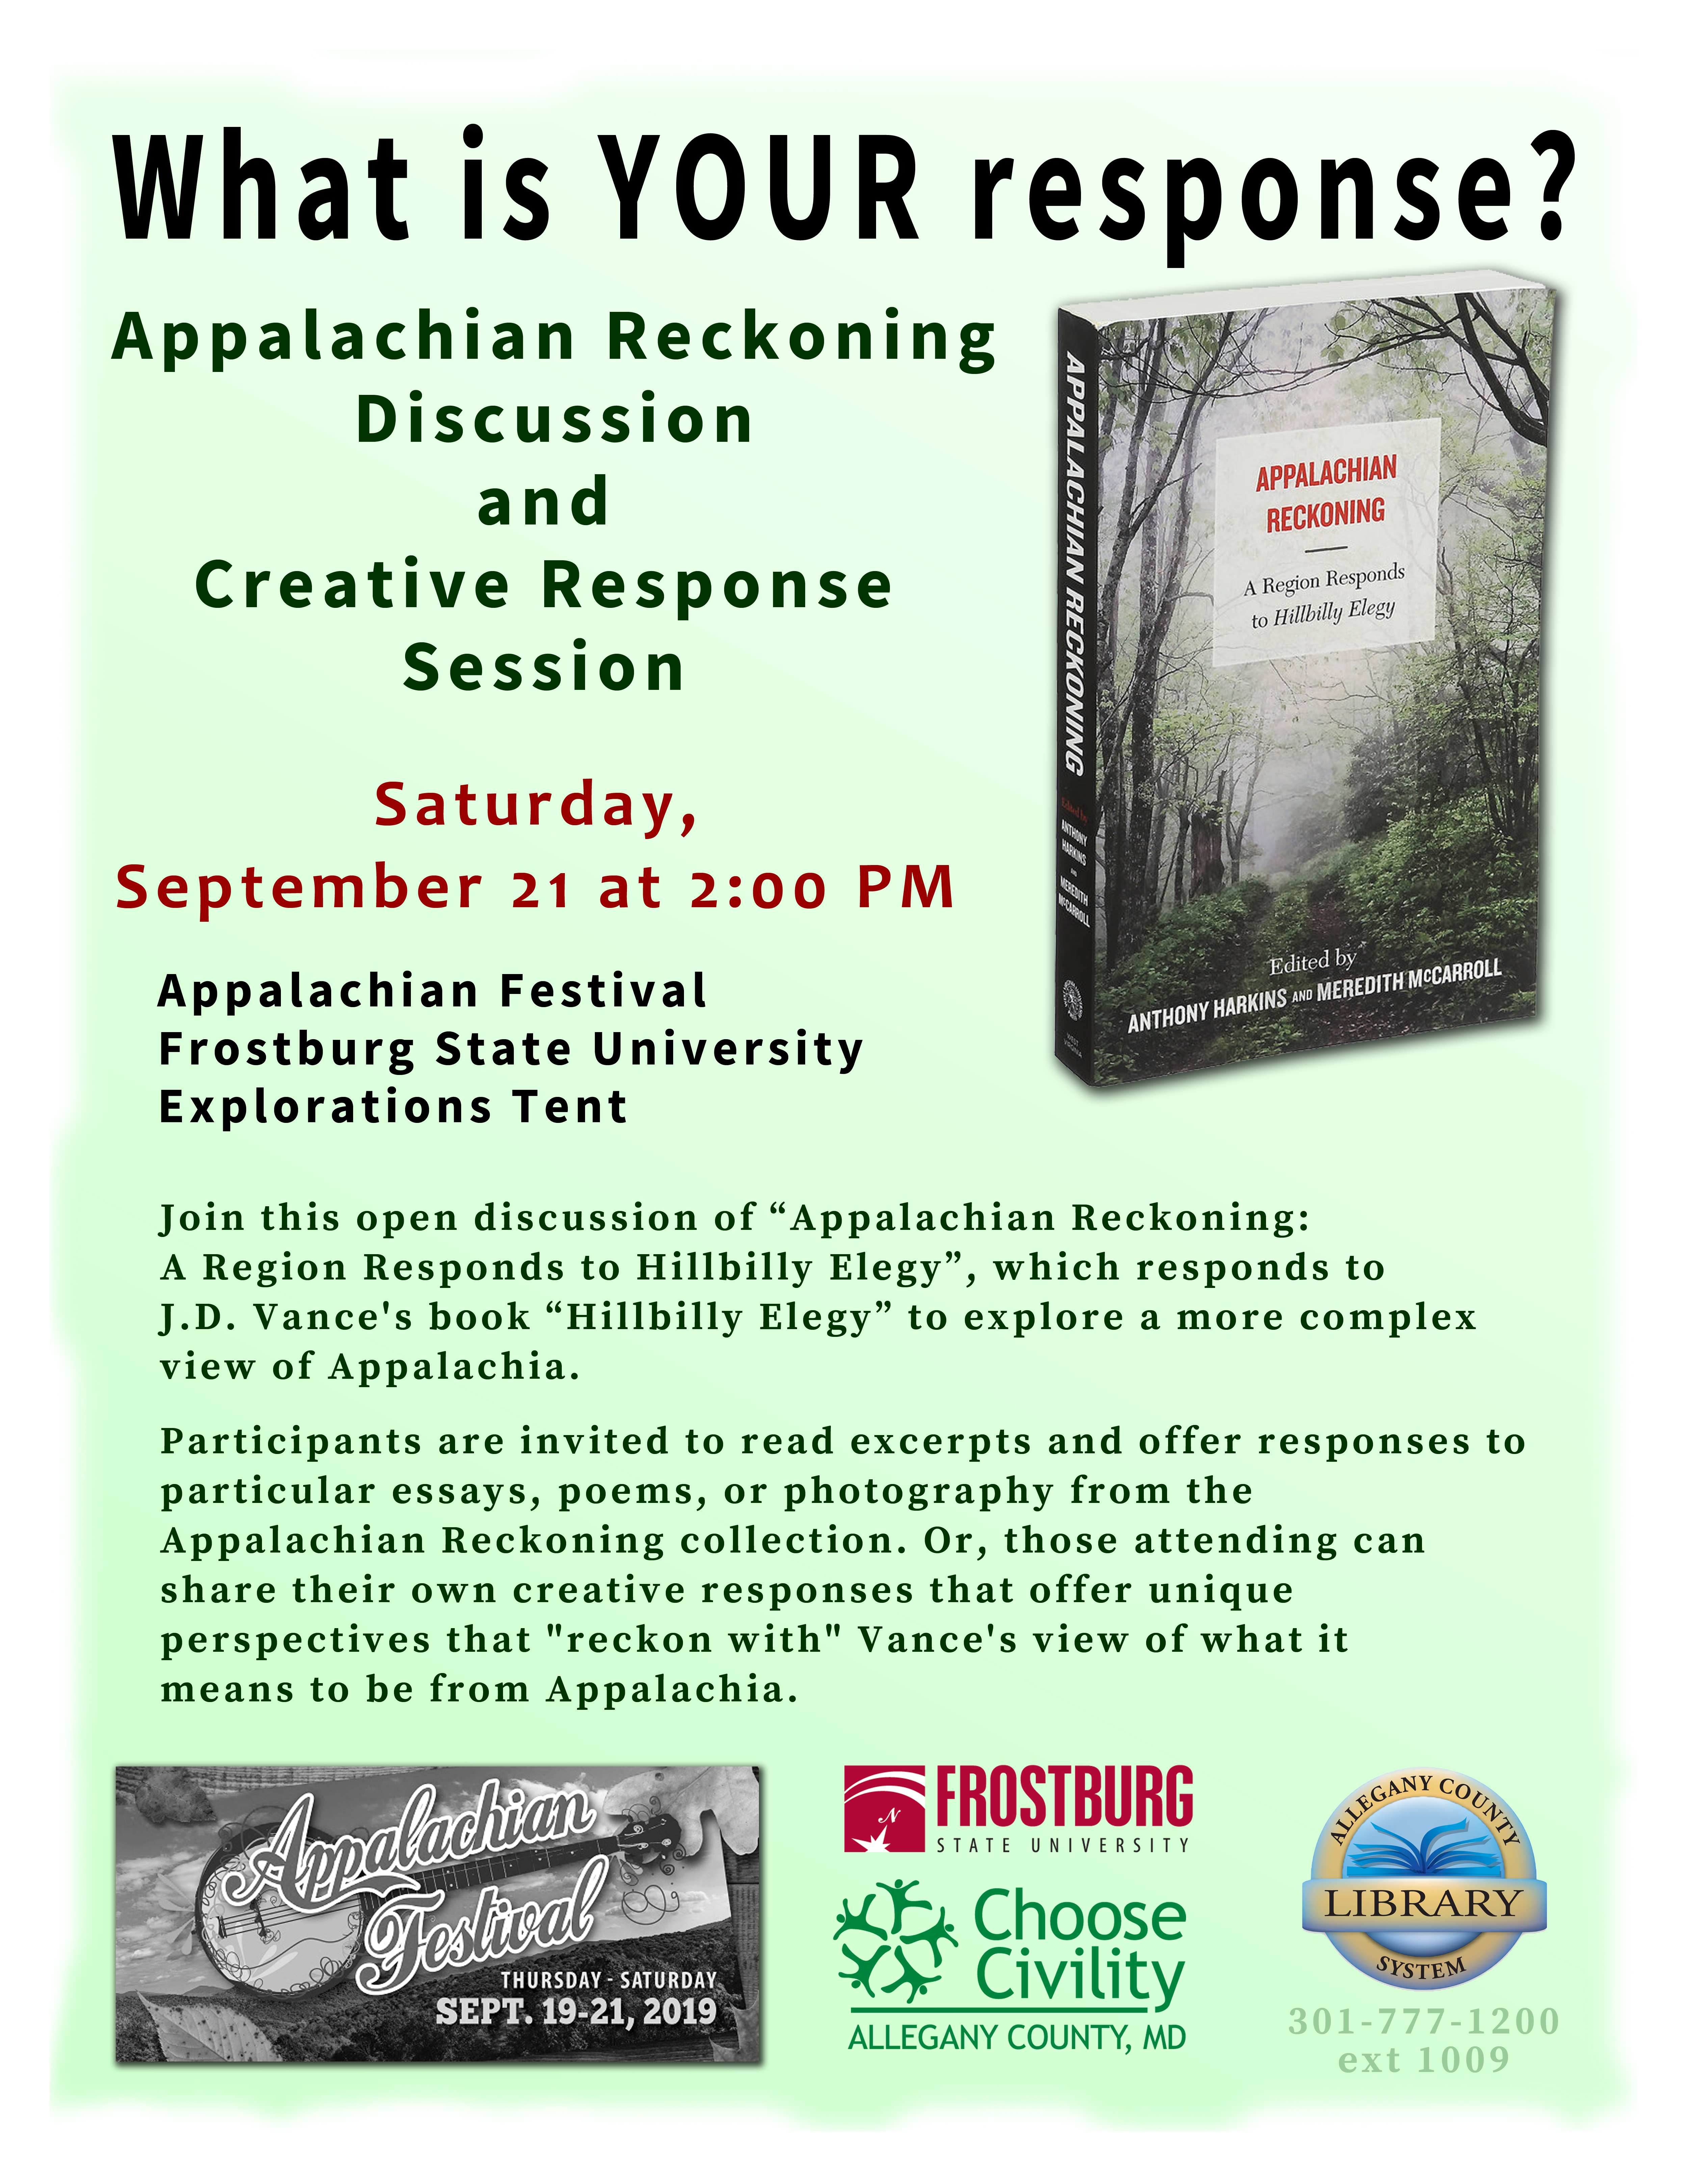 Appalachian Reckoning Discussion & Creative Response Session